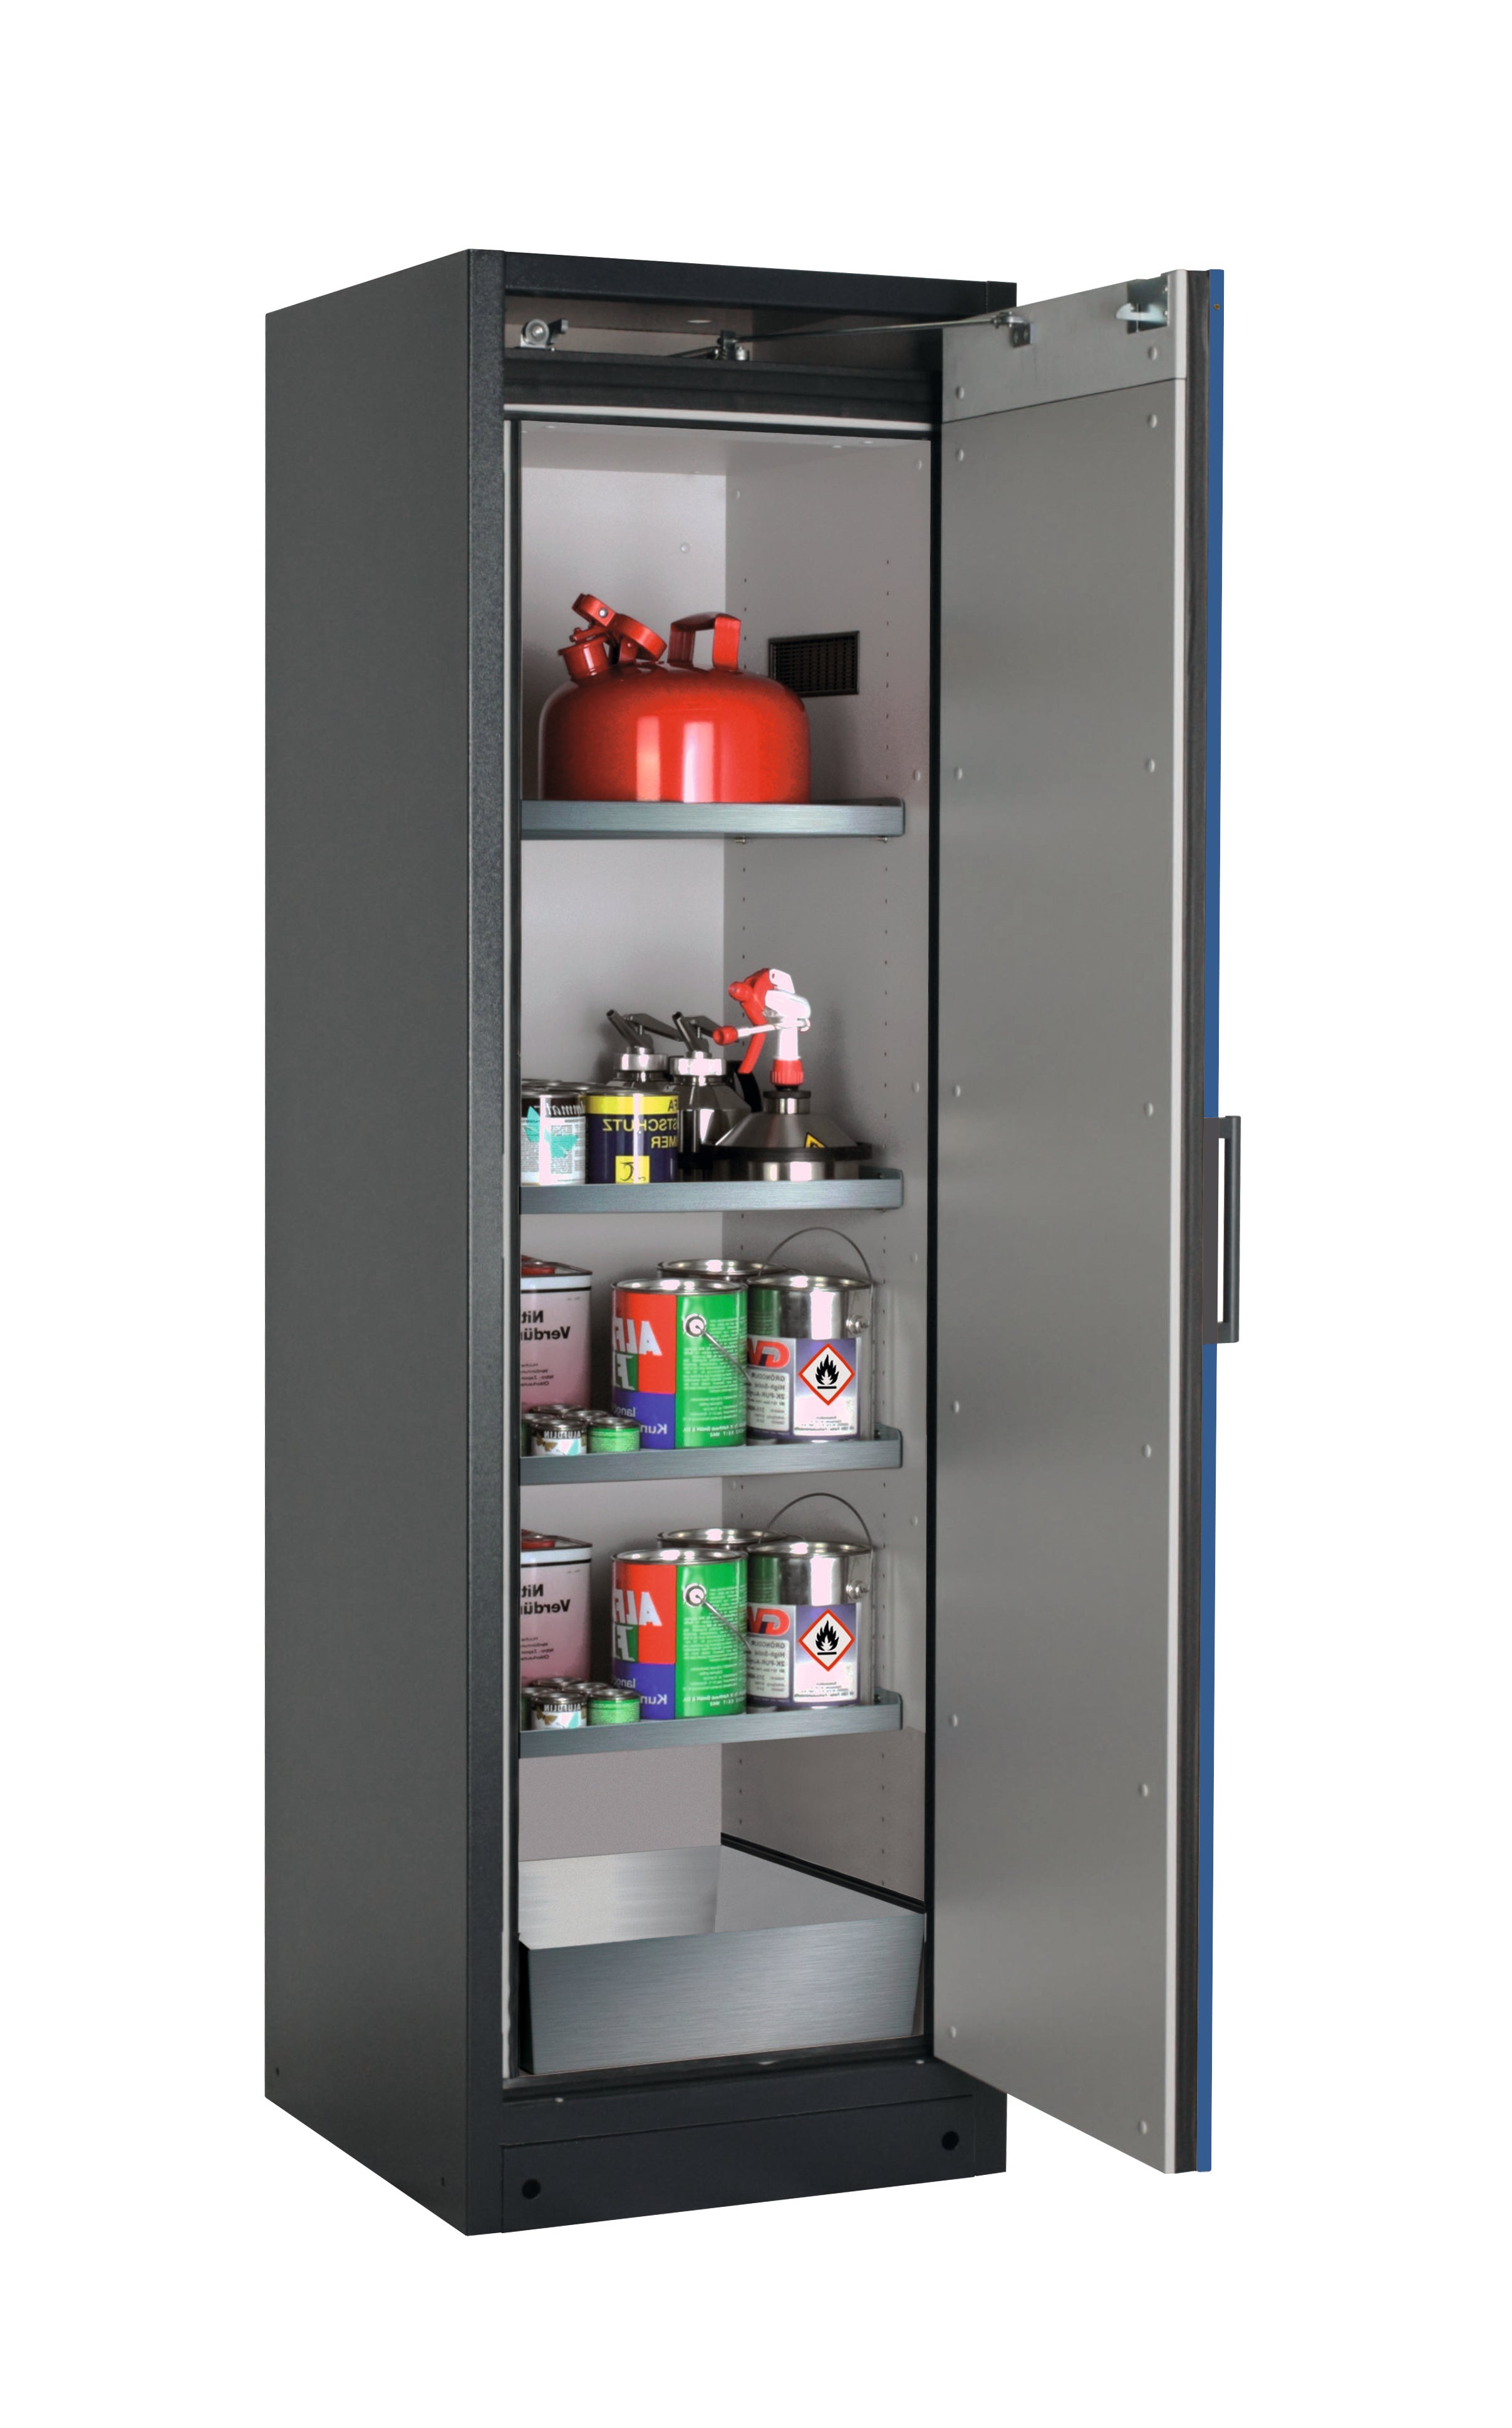 Type 90 safety storage cabinet Q-PEGASUS-90 model Q90.195.060.WDACR in gentian blue RAL 5010 with 4x shelf standard (stainless steel 1.4301),